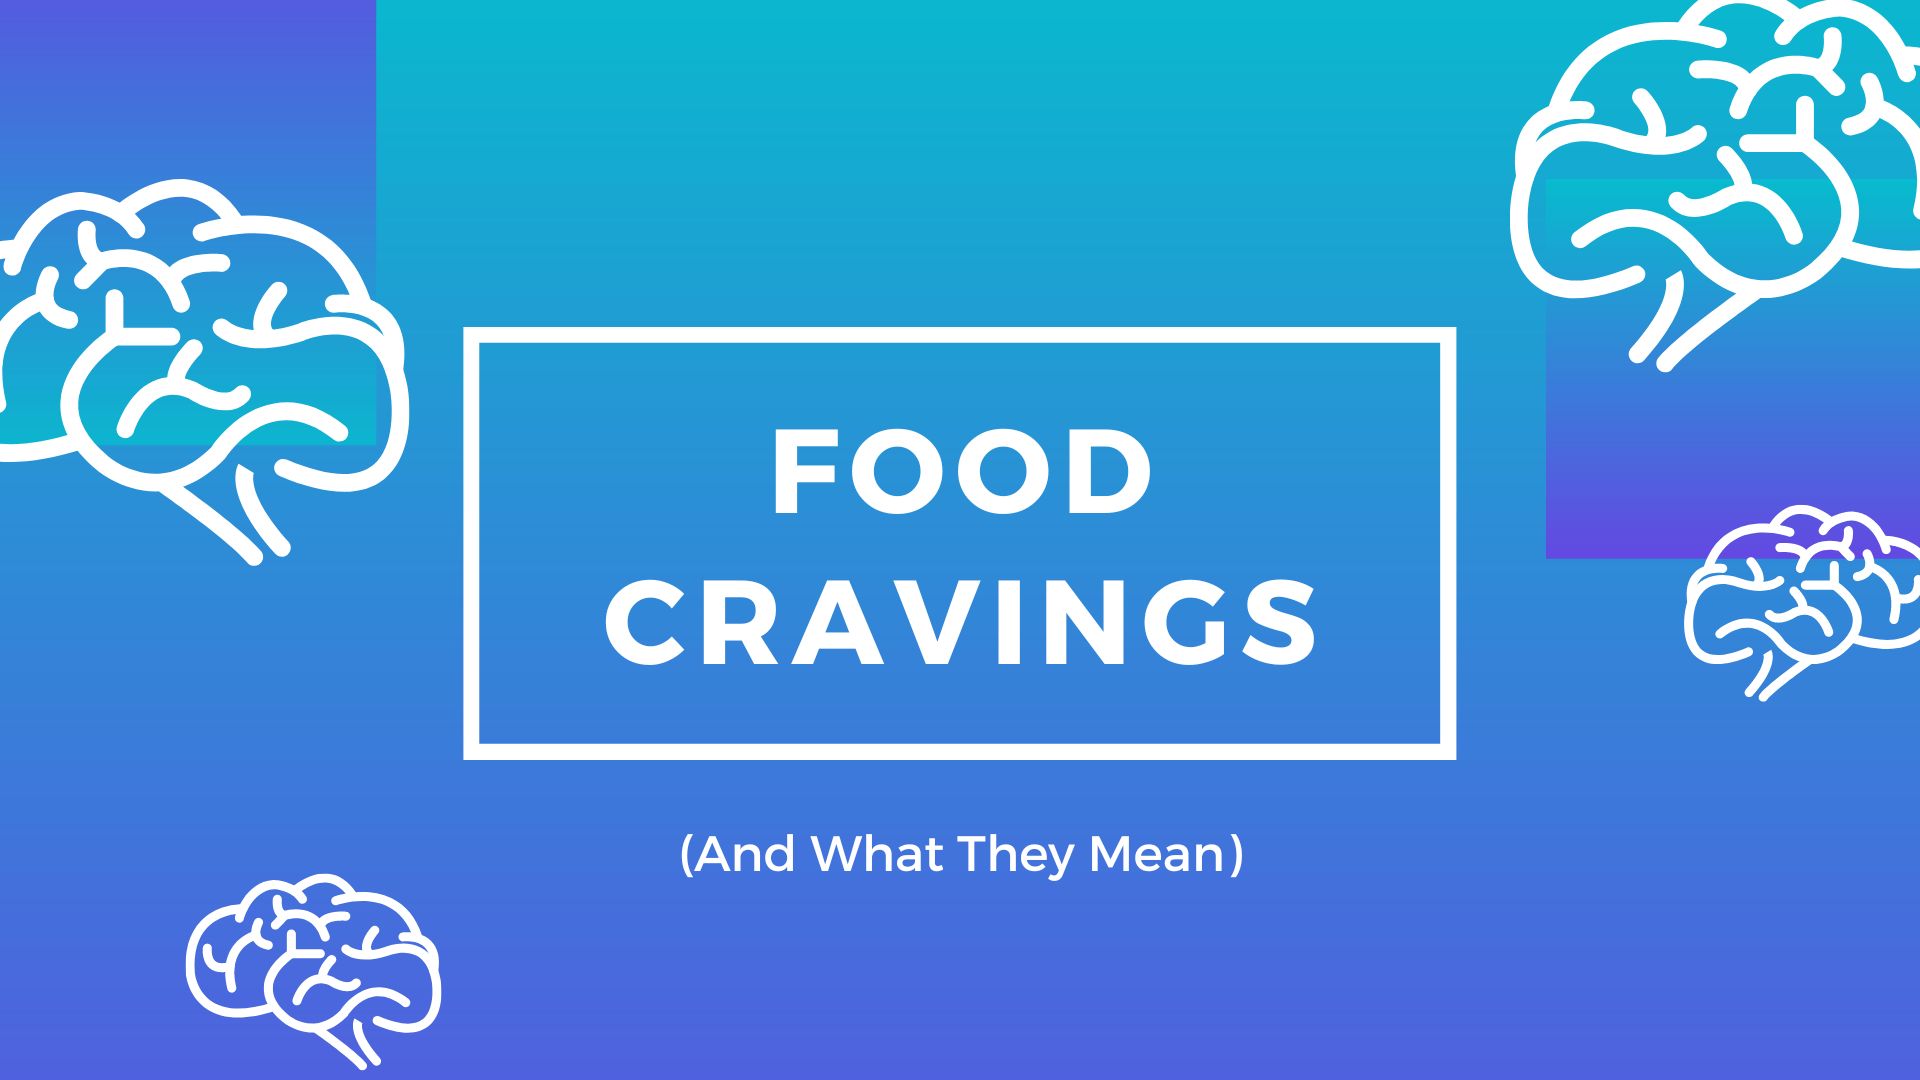 Food cravings and what they mean